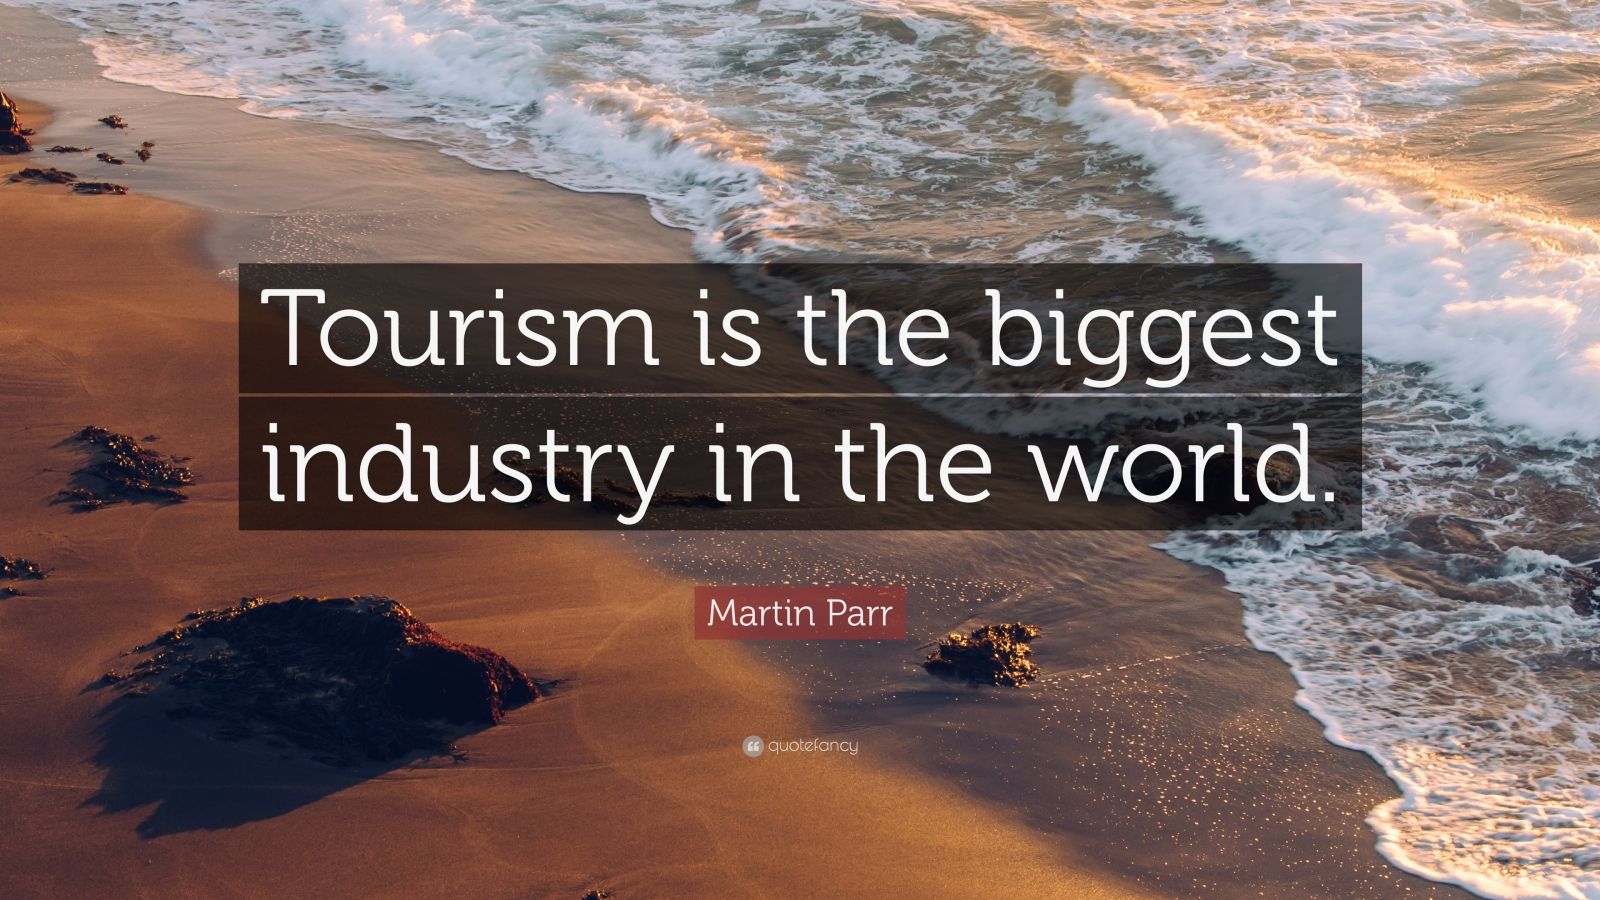 international tourism is the biggest industry in the world